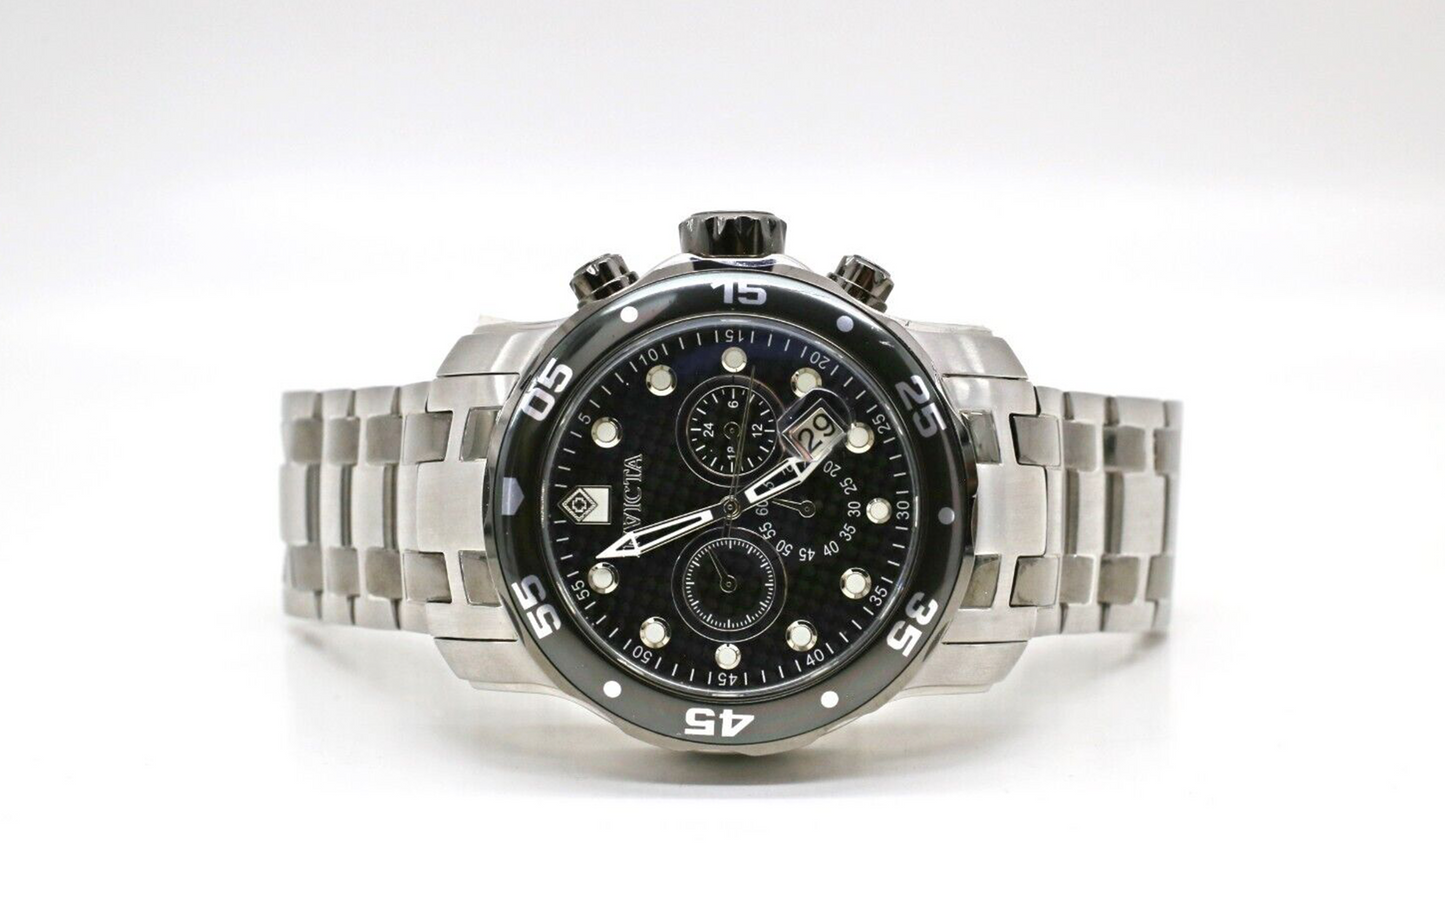 Invicta 14339 Men's Pro Diver Black Dial Chrono Stainless Steel Watch